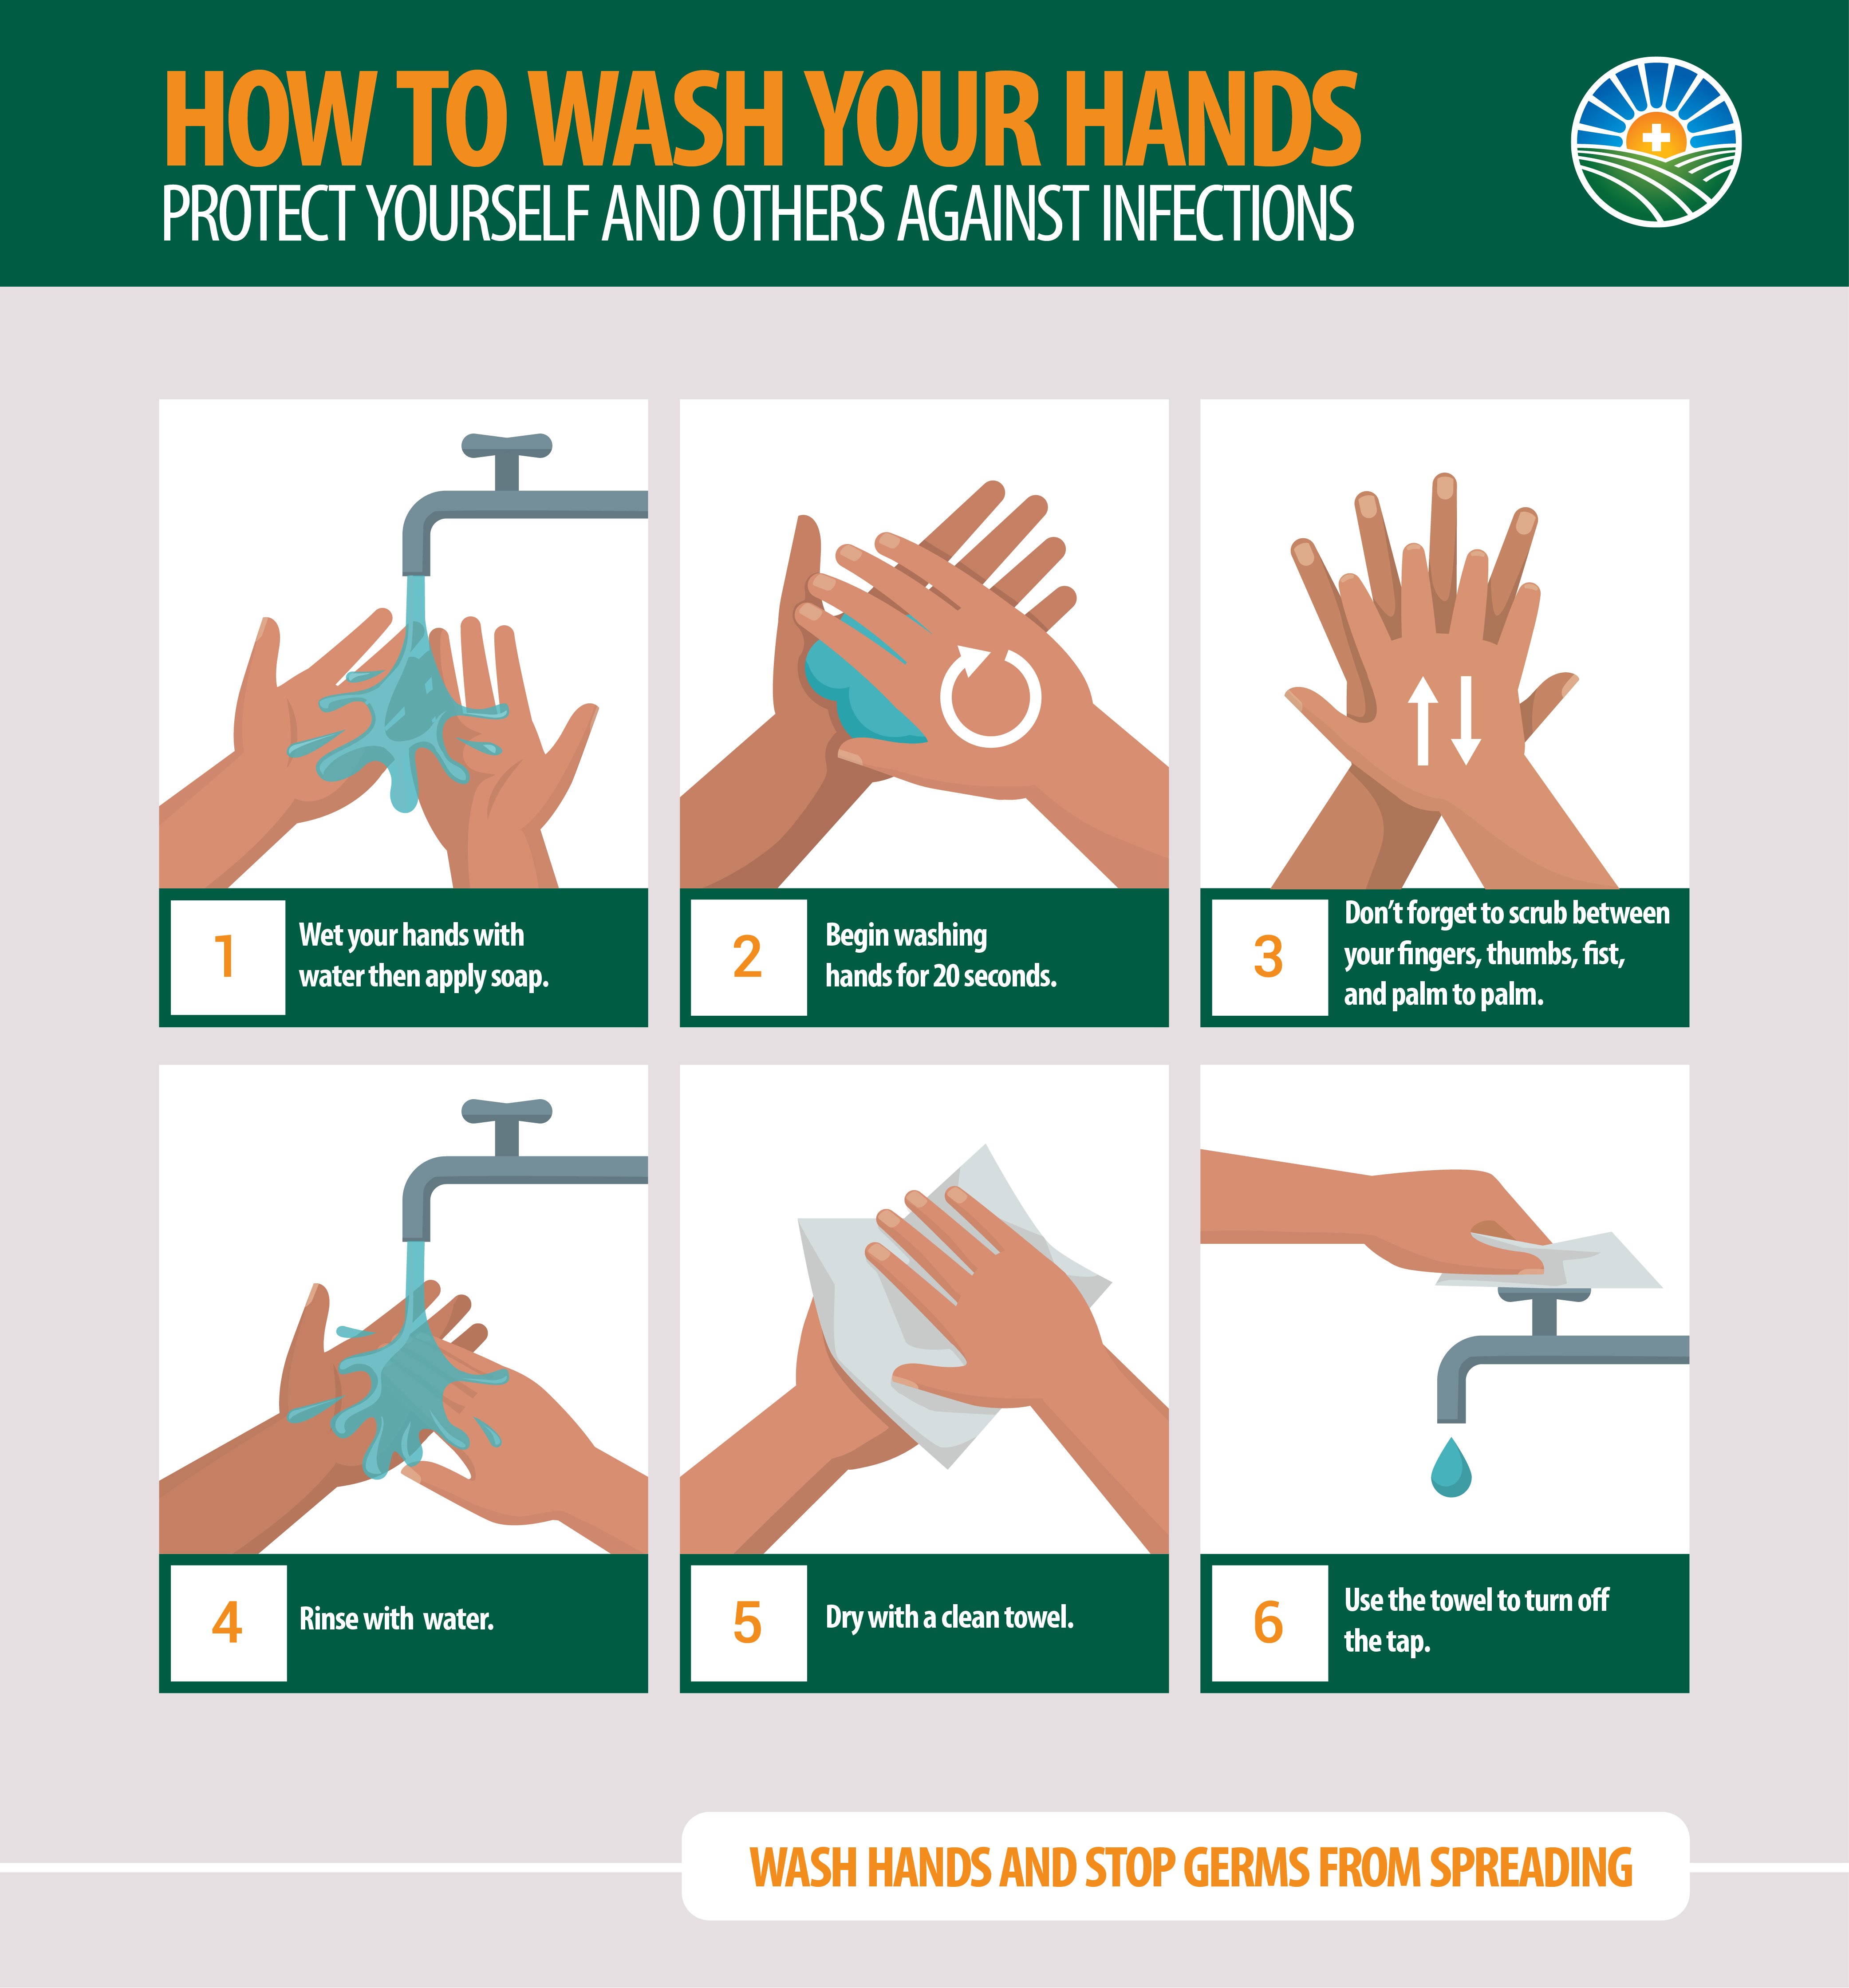 How to wash your hands?